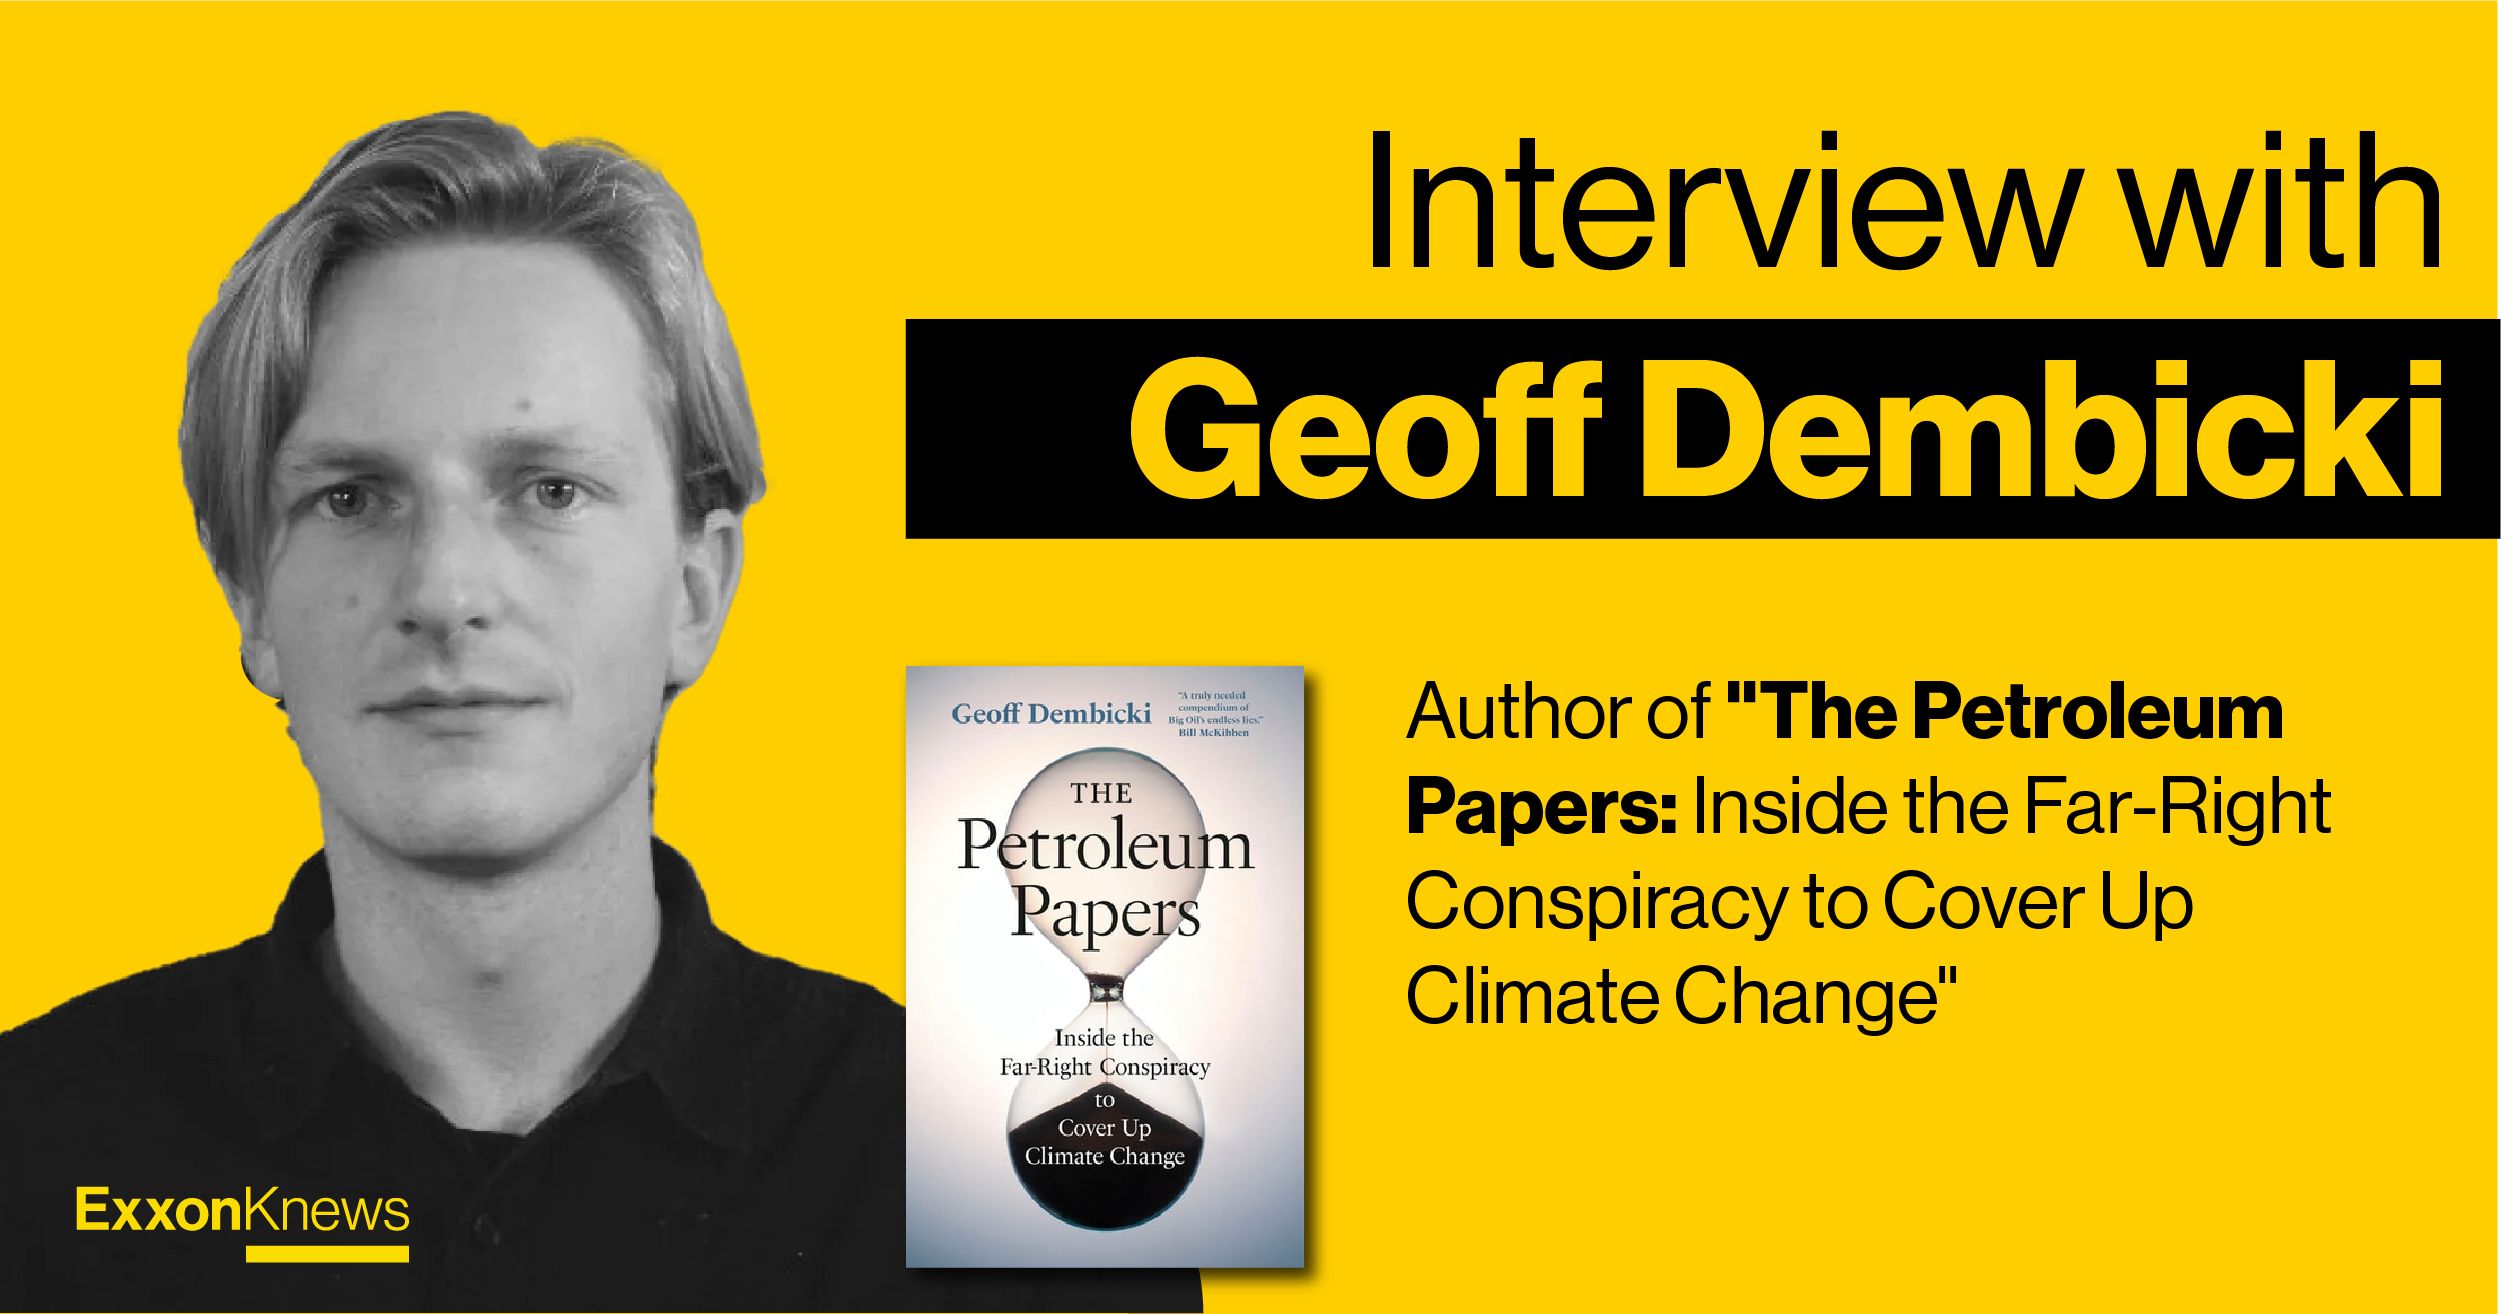 The Petroleum Papers: Inside the Far-Right Conspiracy to Cover Up Climate  Change by Geoff Dembicki